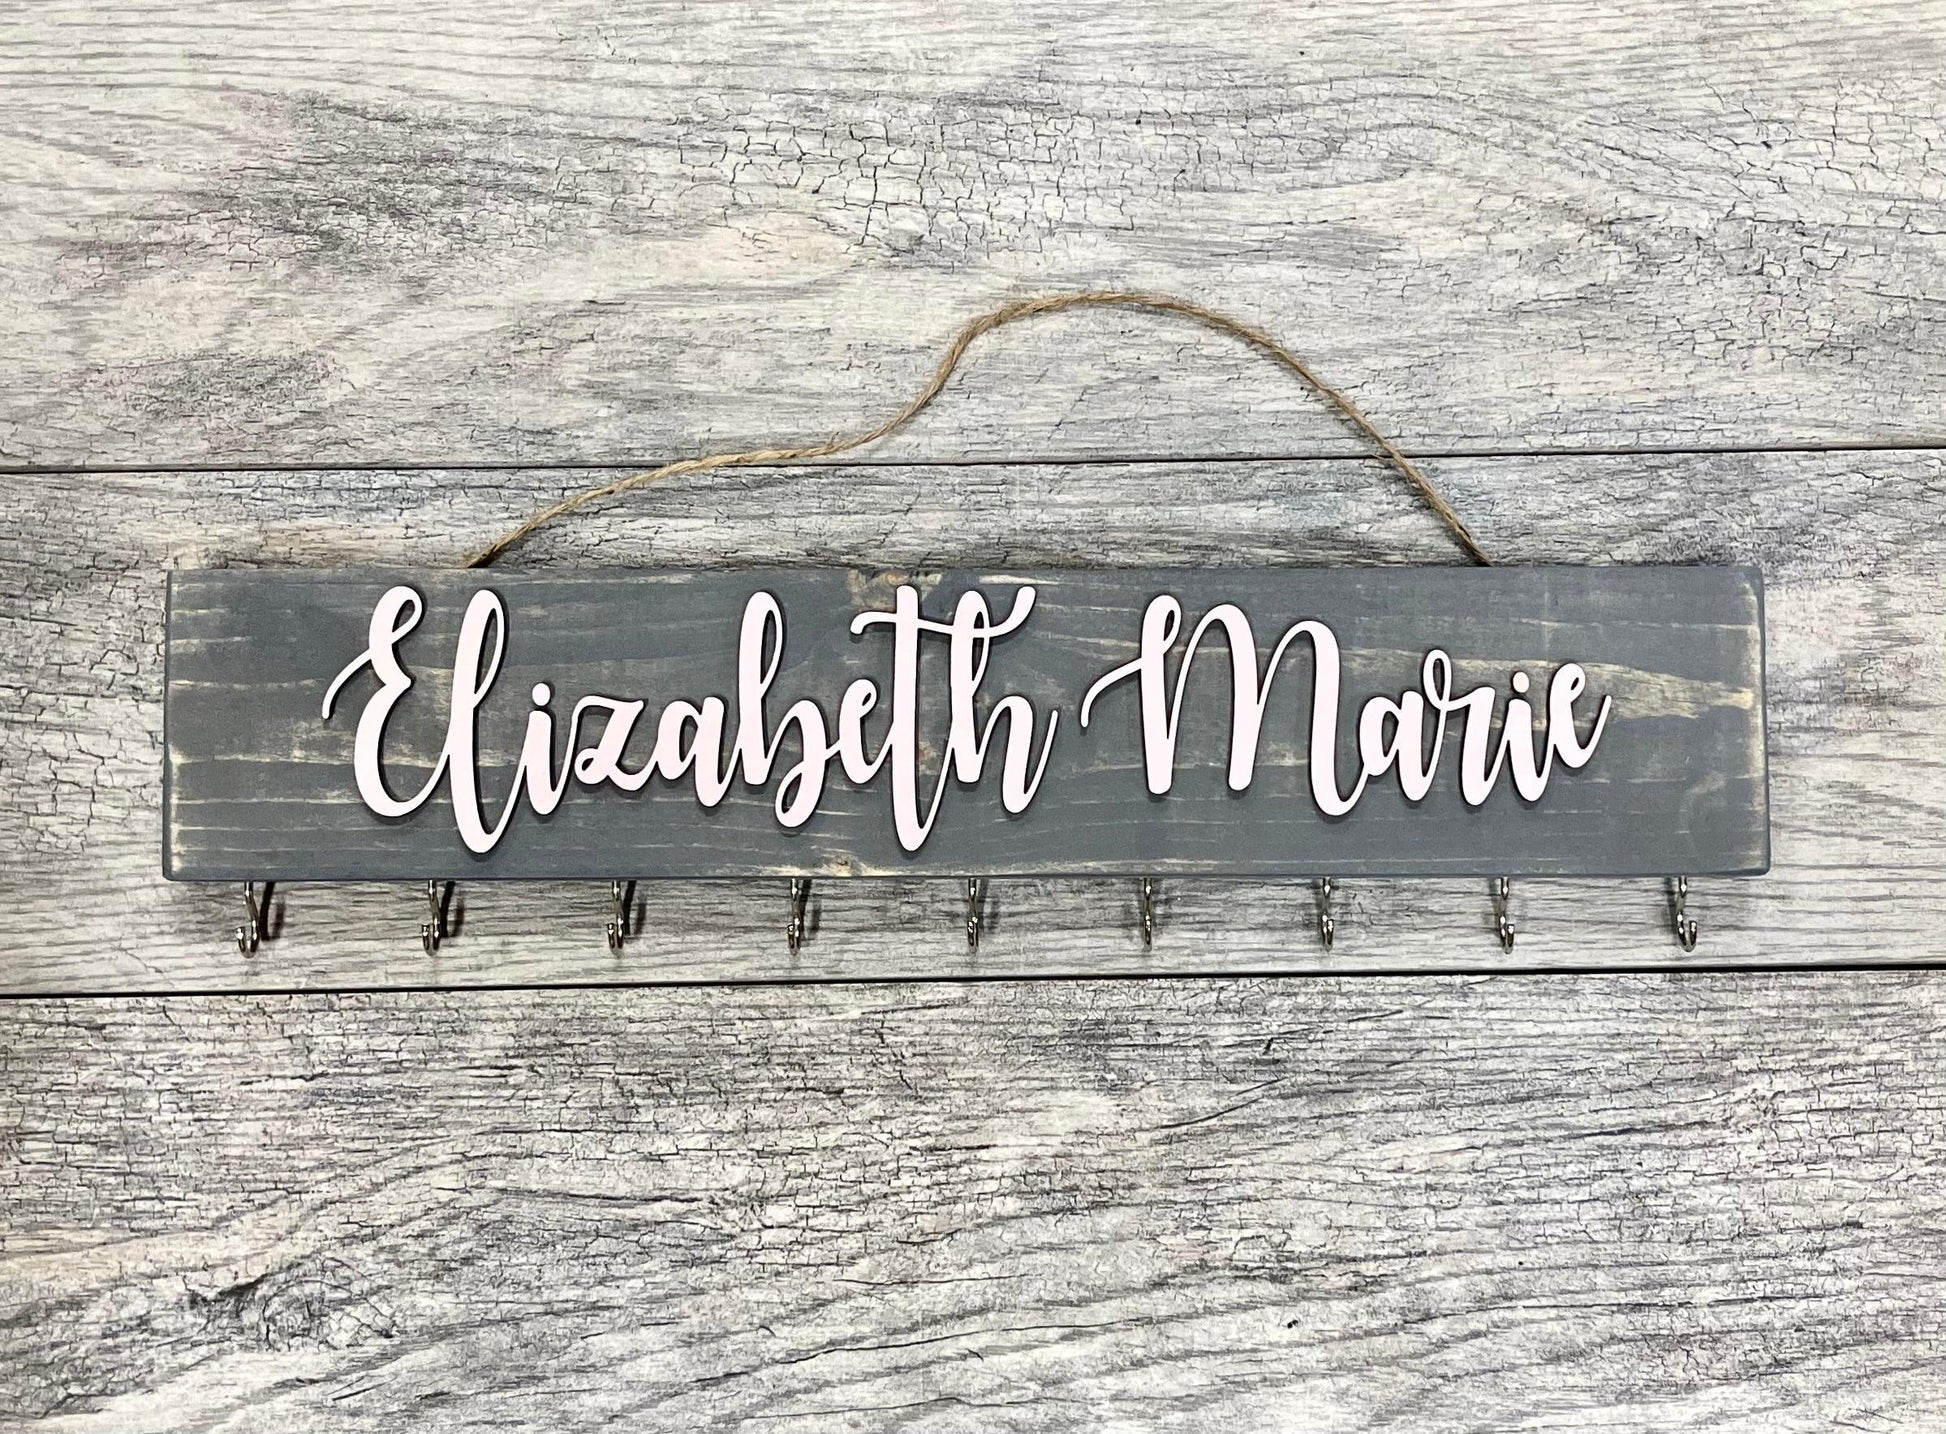 Personalized Headband and Bow Holder - Giggle and Jump